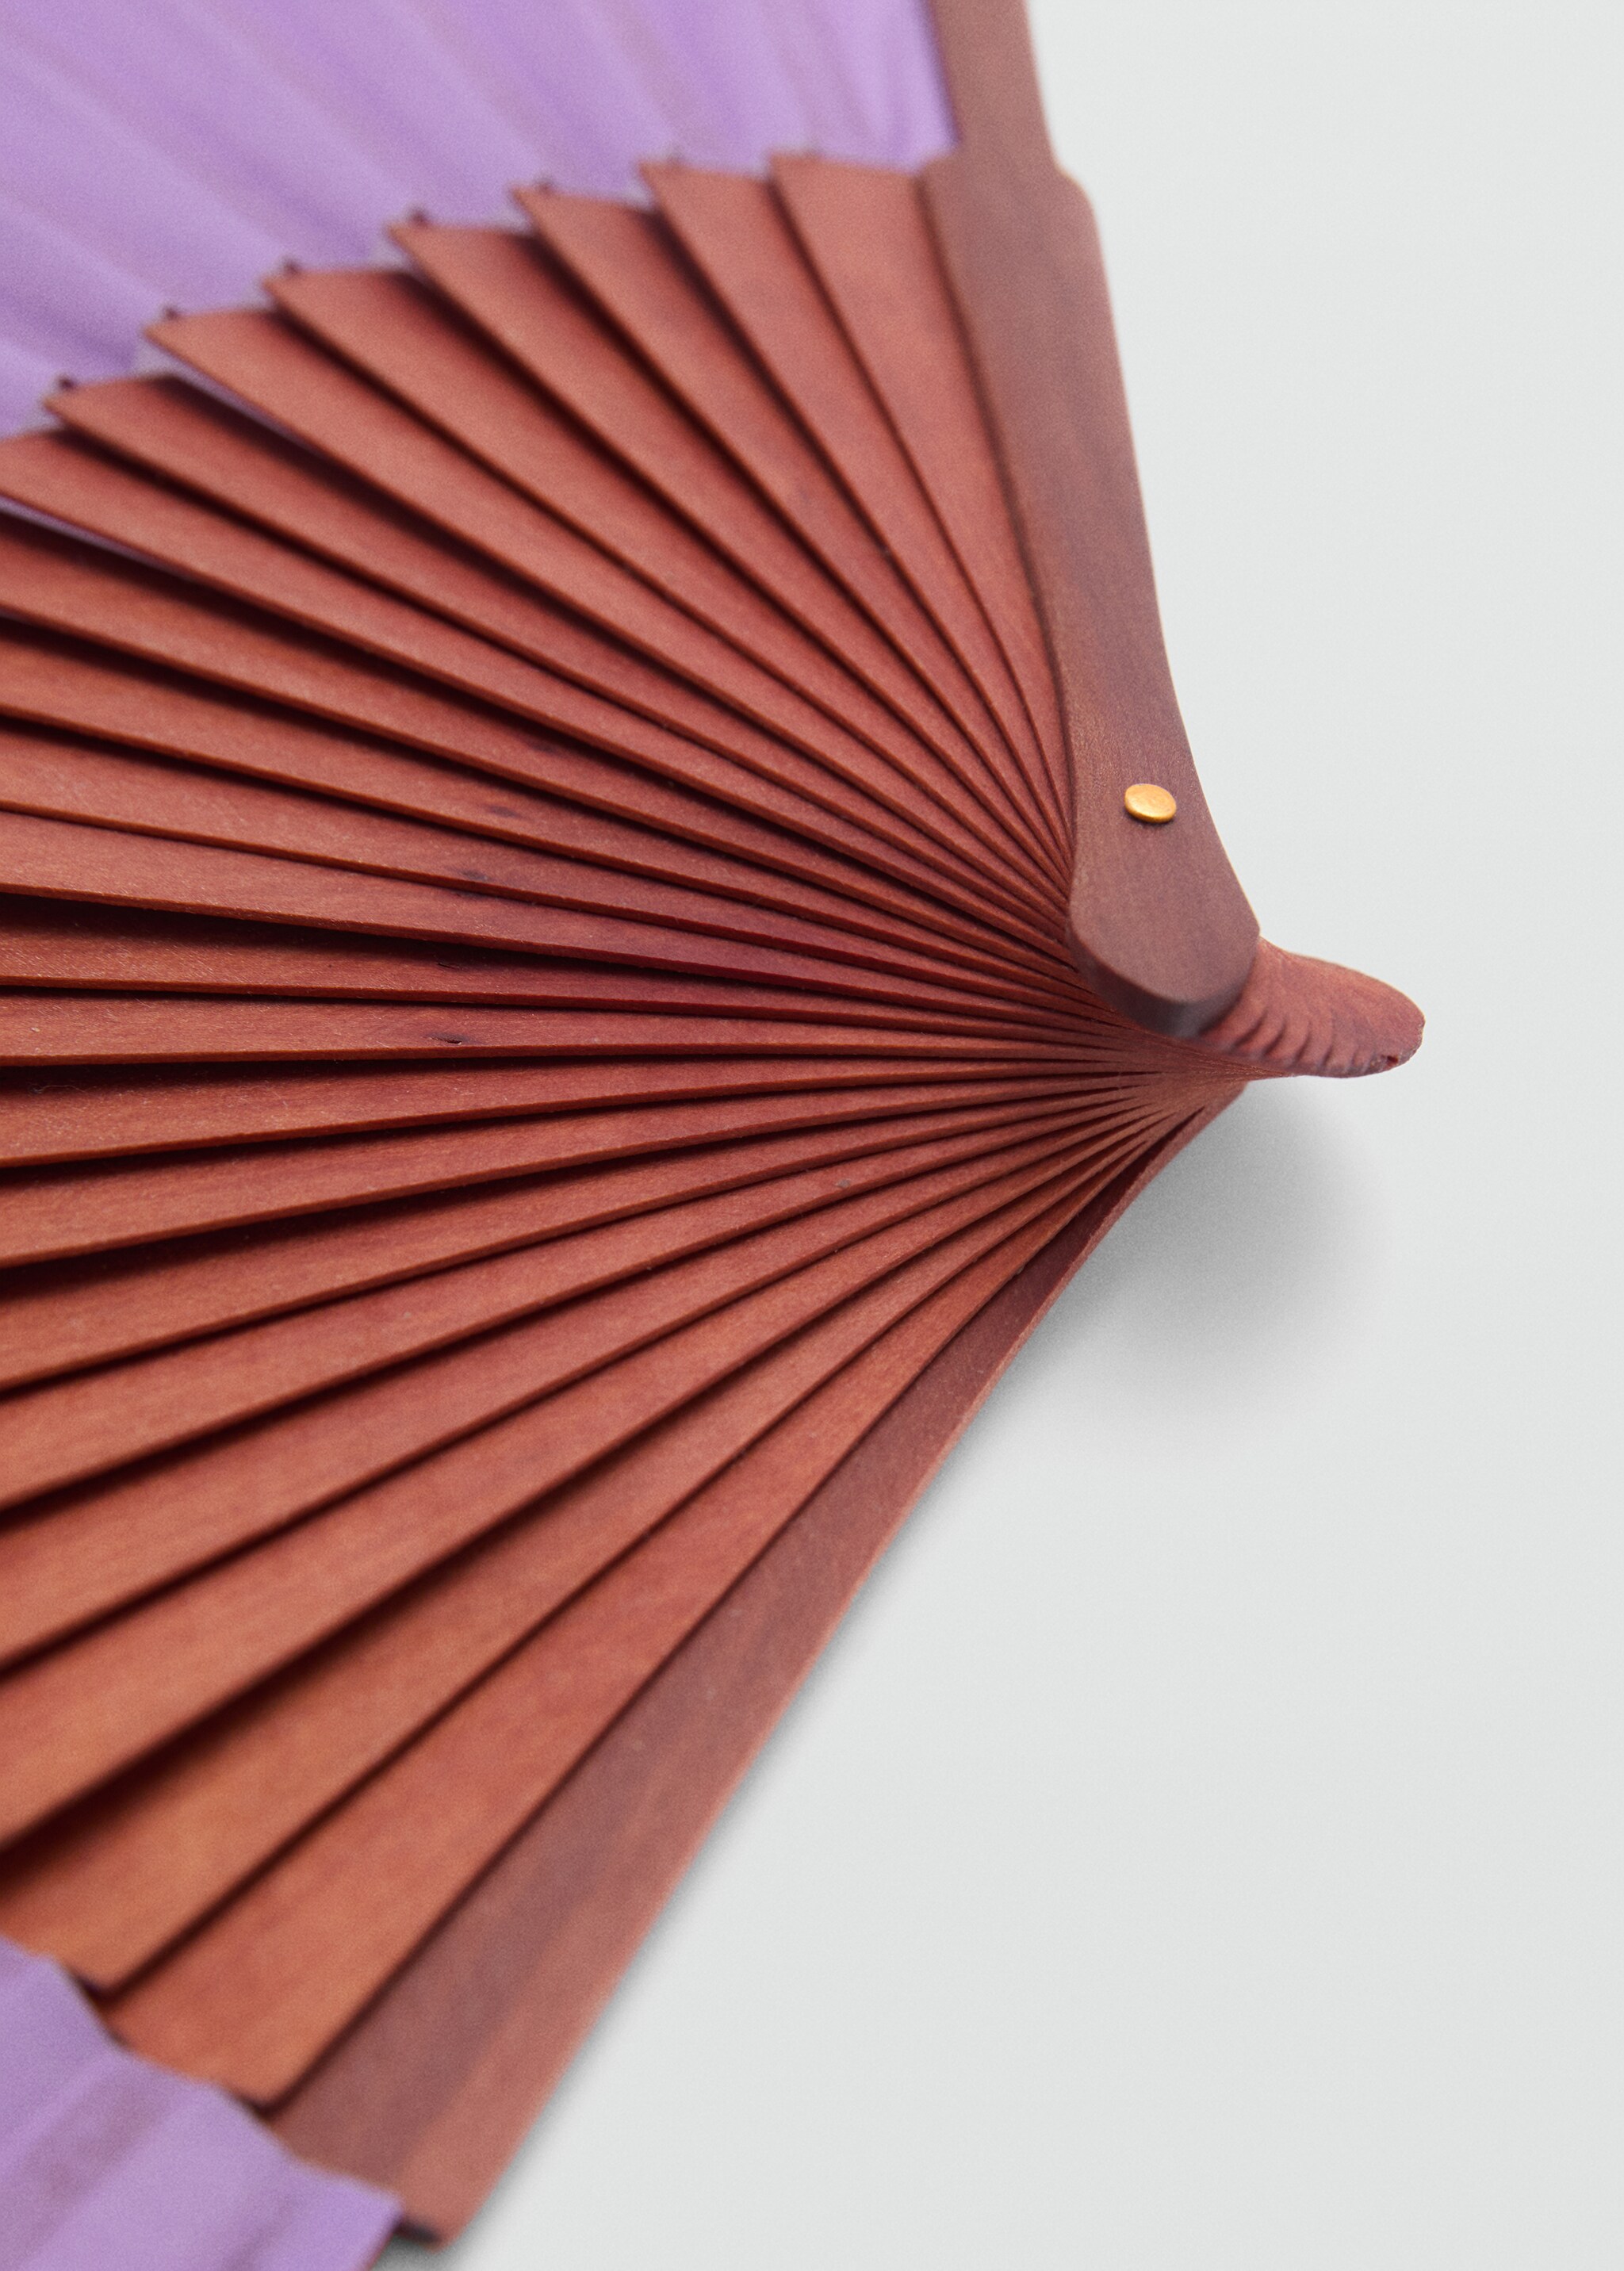 Wooden fan - Details of the article 1